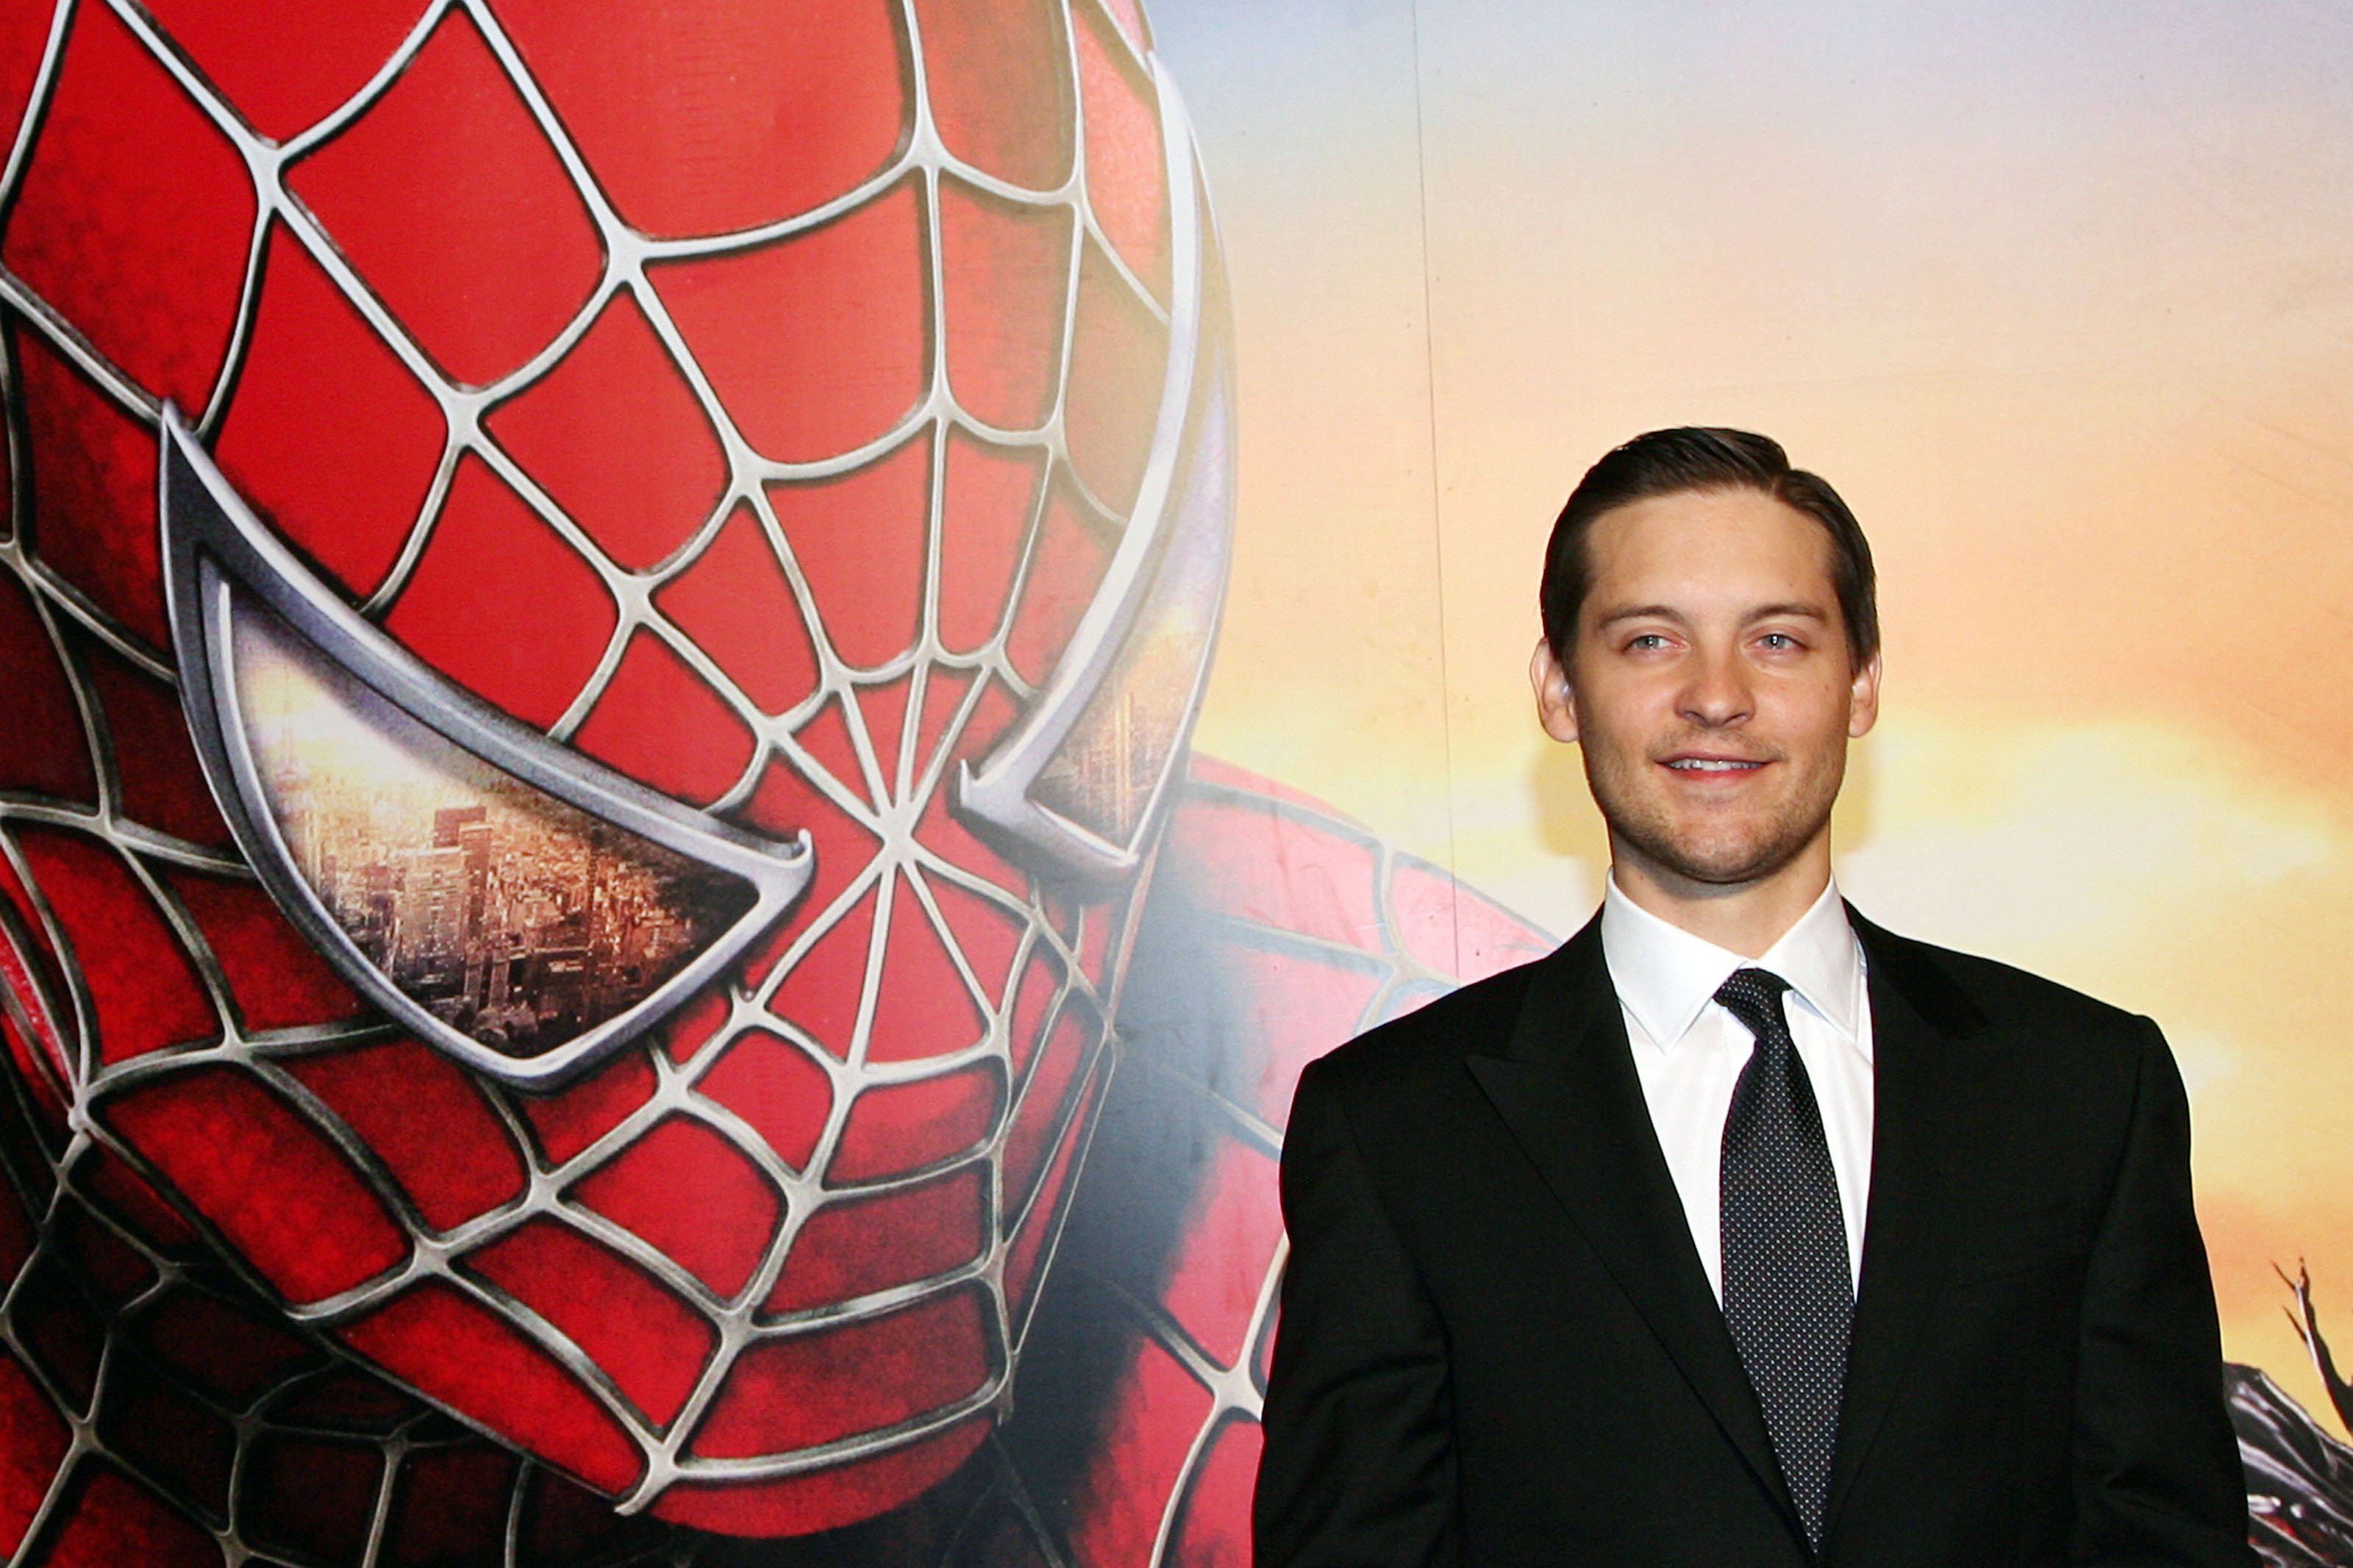 Tobey Maguire, who starred in the 'Spider-Man' movie, wears a black suit over a white button-up shirt and gray tie.